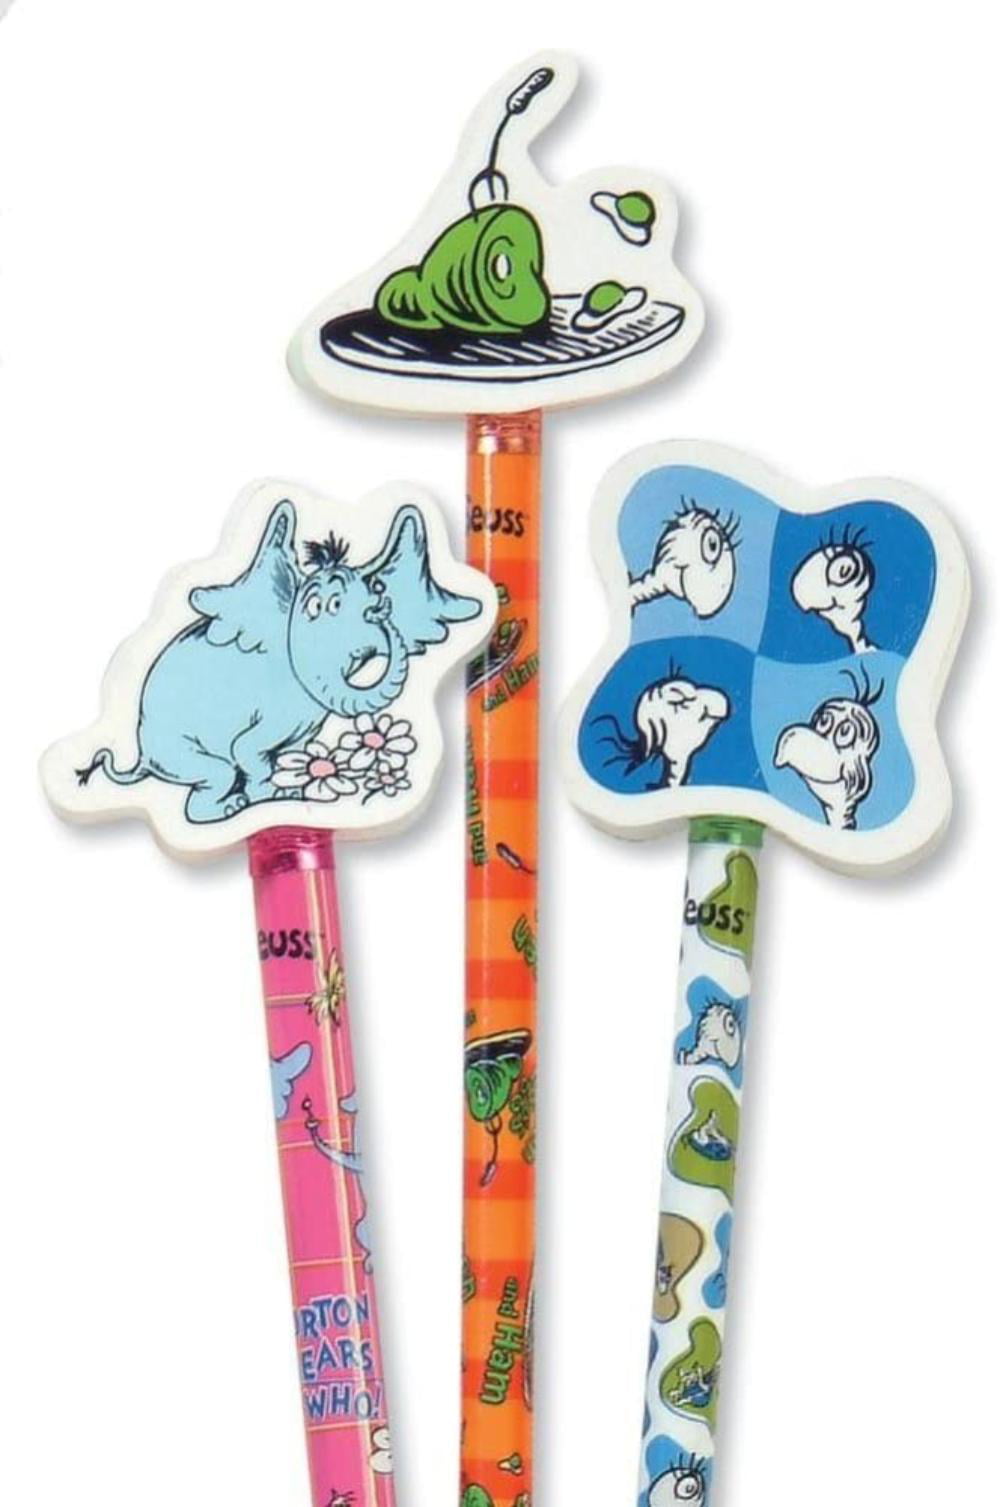 Dr Seuss Pencils 20-Pc Set with Giant Eraser Toppers 10 Pencils & 10 Erasers 